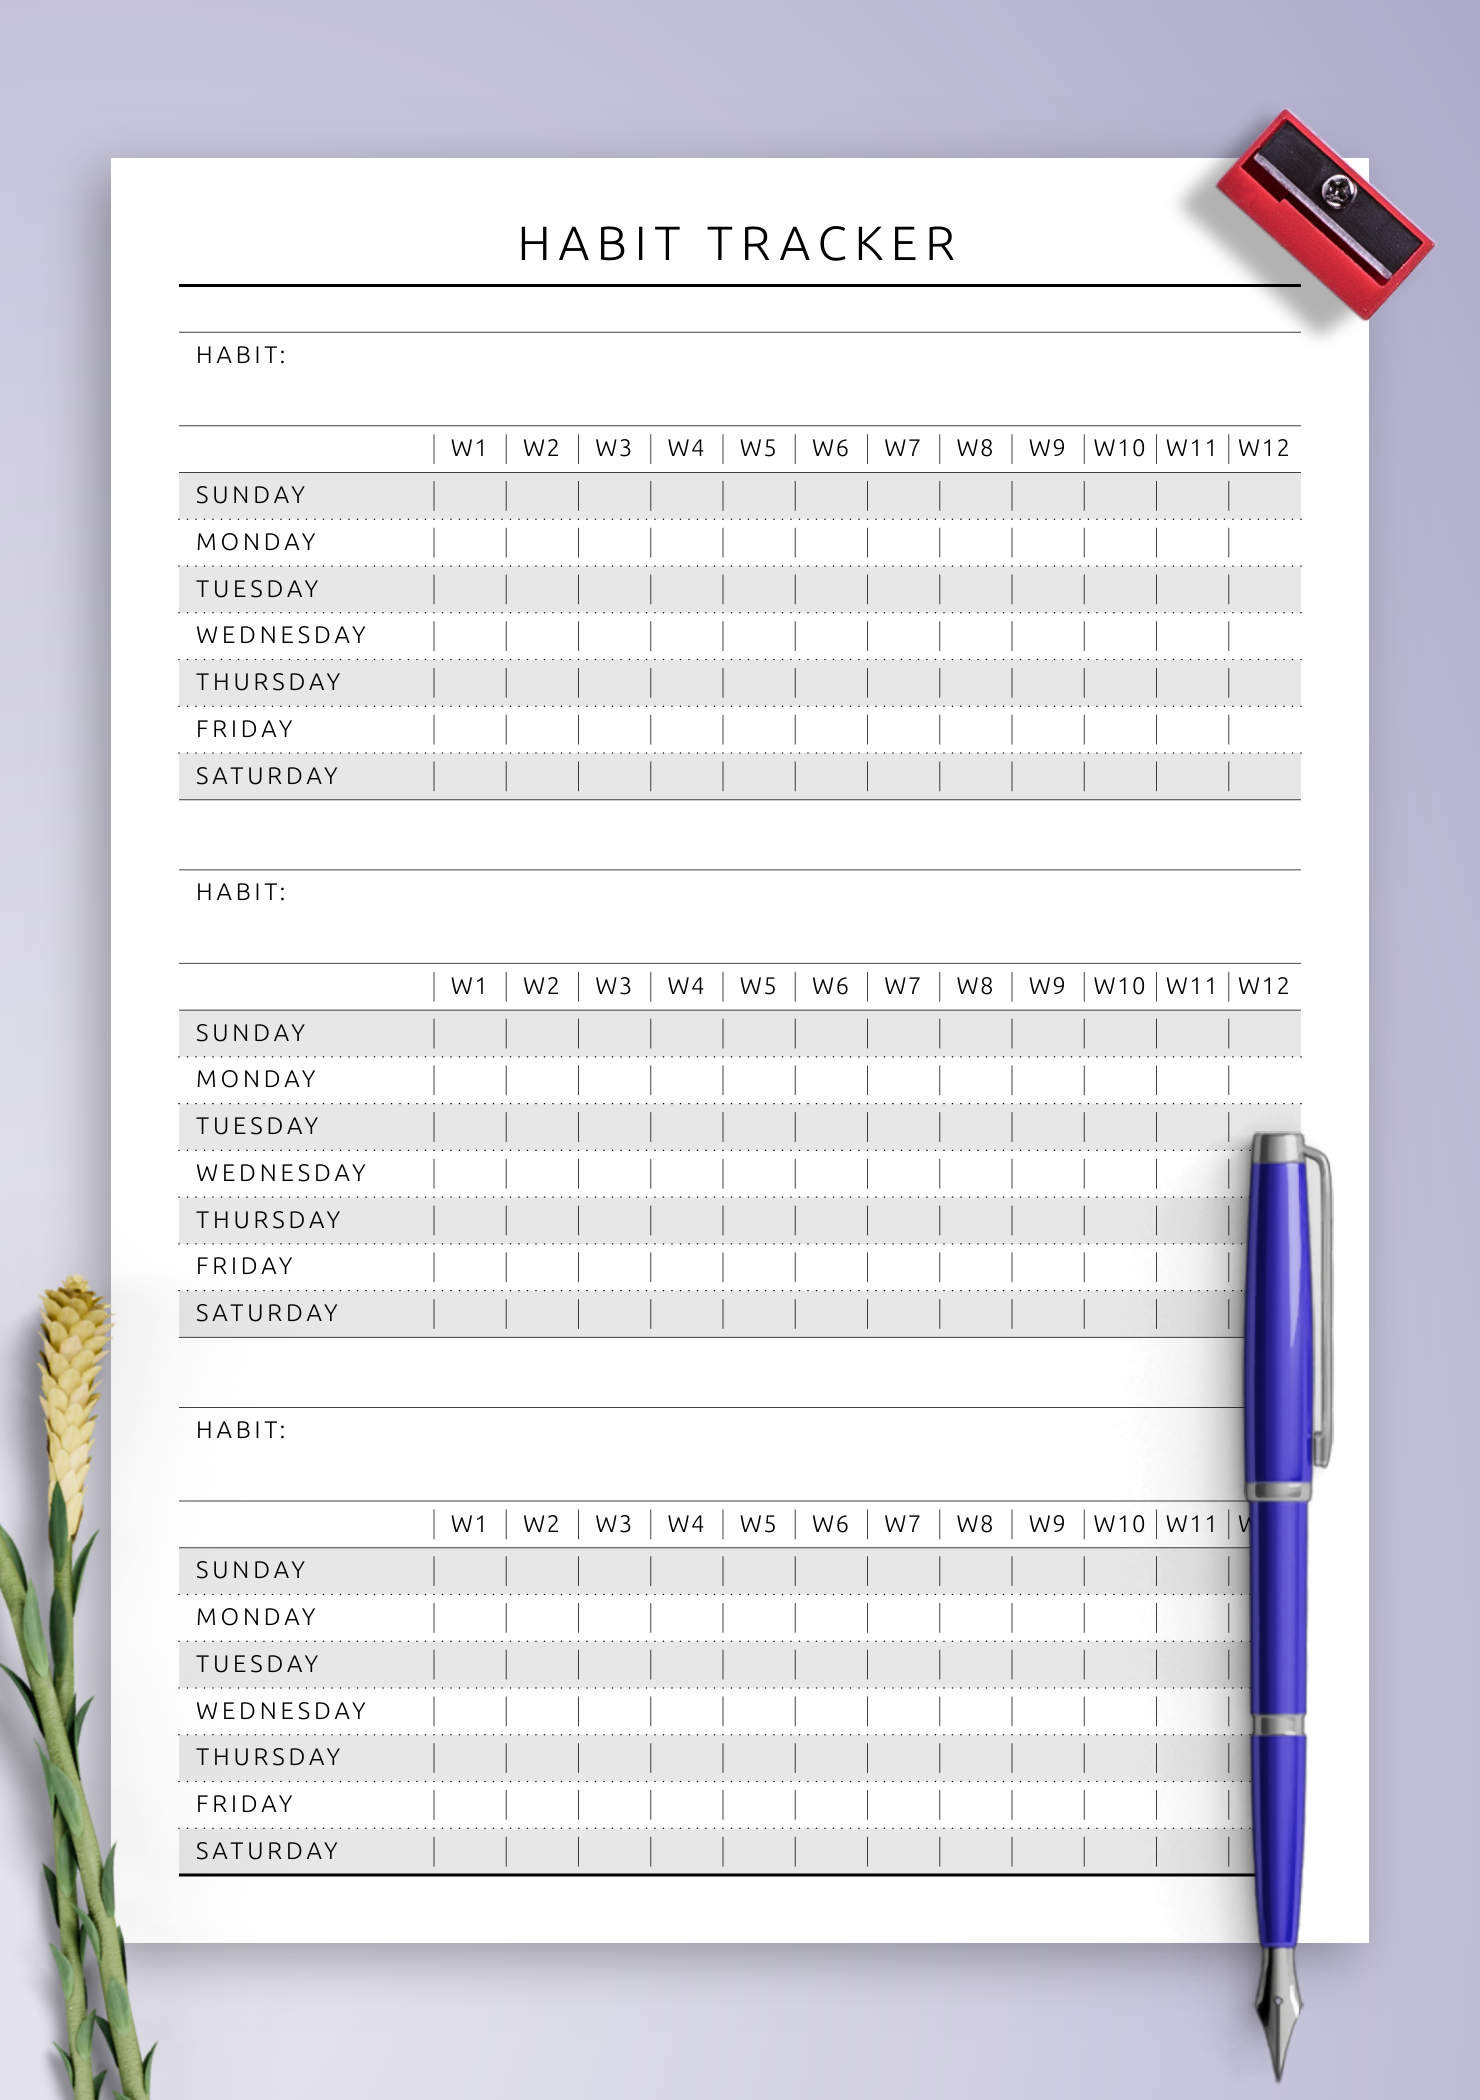 Monthly habit tracker steps tracker template mood log template healthy food log sobriety tracker weight loss log fitness log